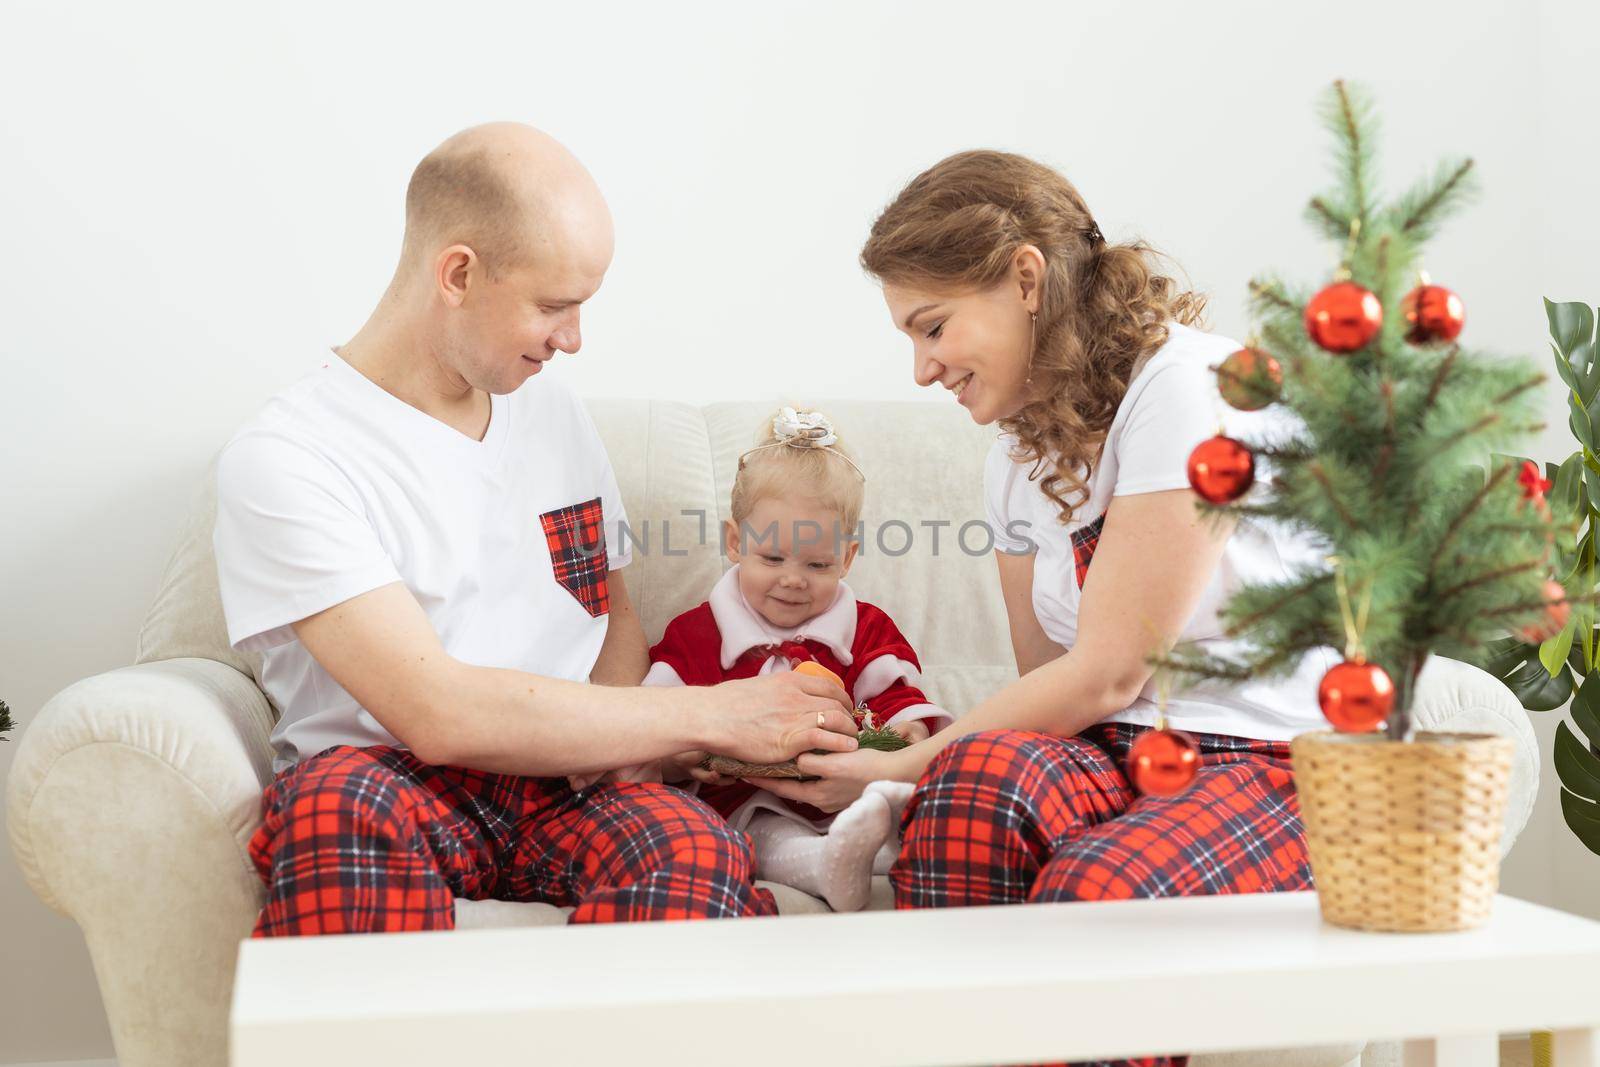 Child with cochlear implant hearing aid having fun with parents in christmas living room - diversity , deafness treatment and medical innovative technologies by Satura86